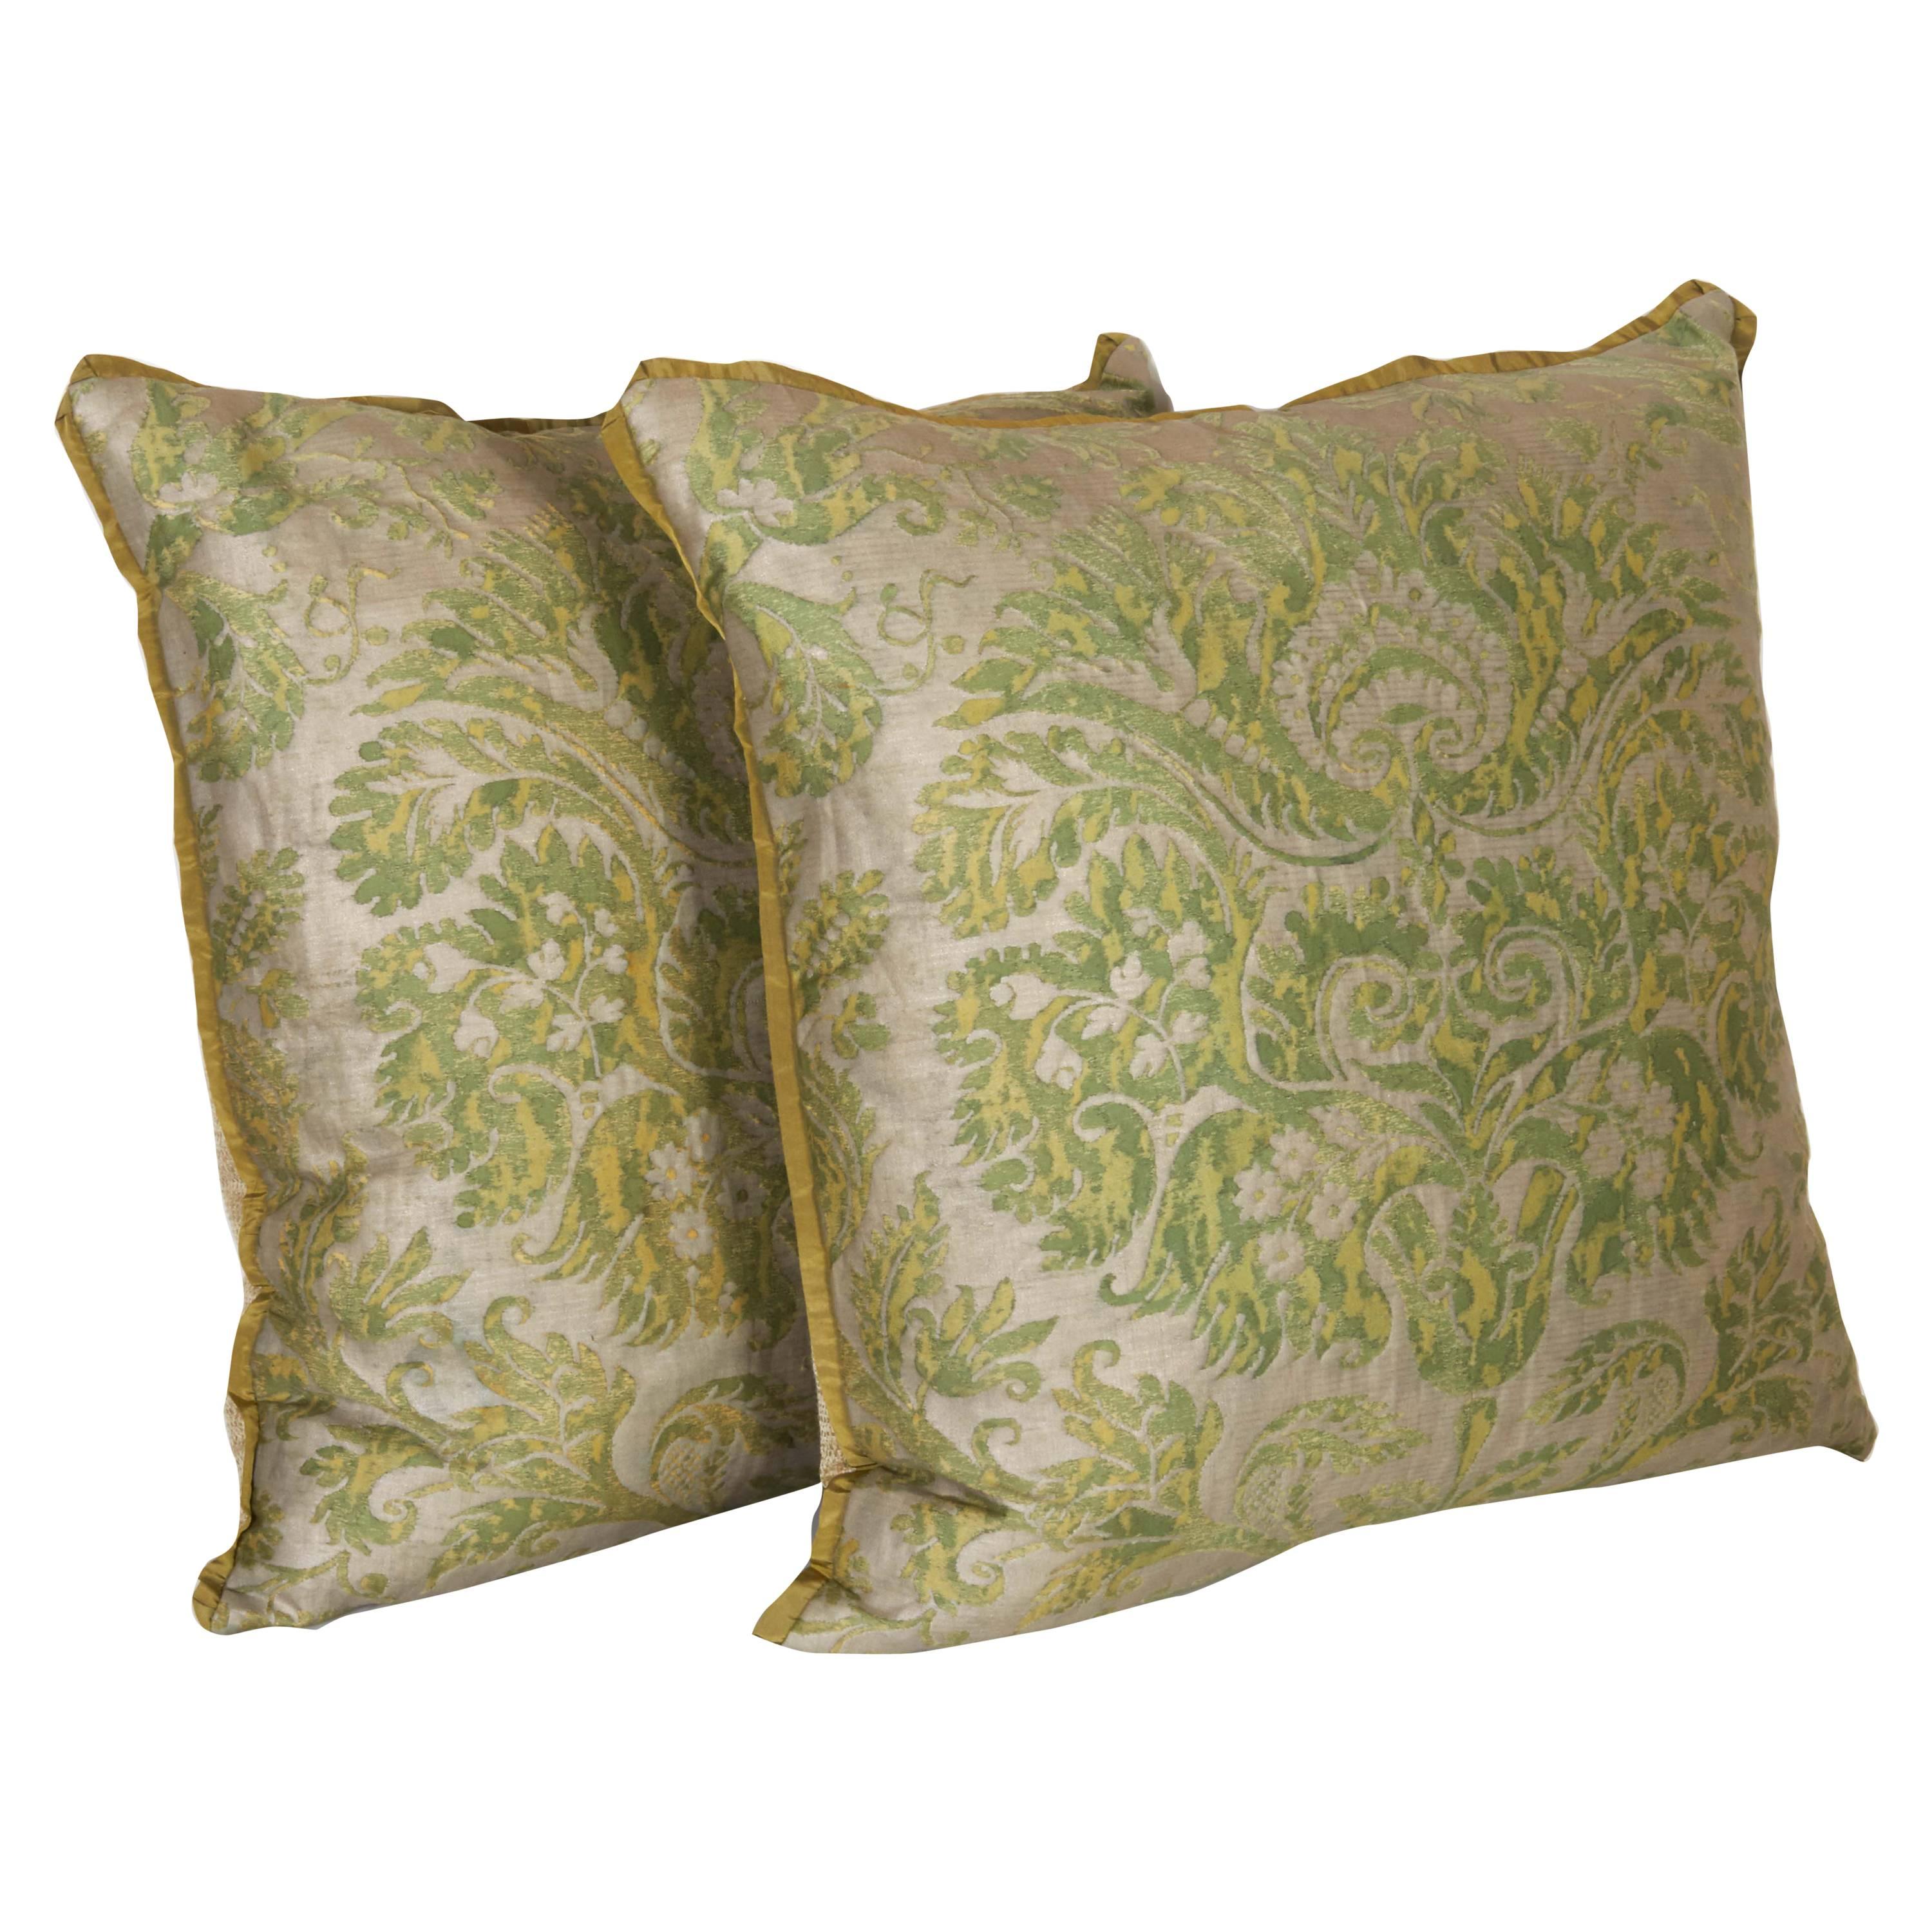 A Pair of Fortuny Fabric Cushions in the DeMedici Pattern